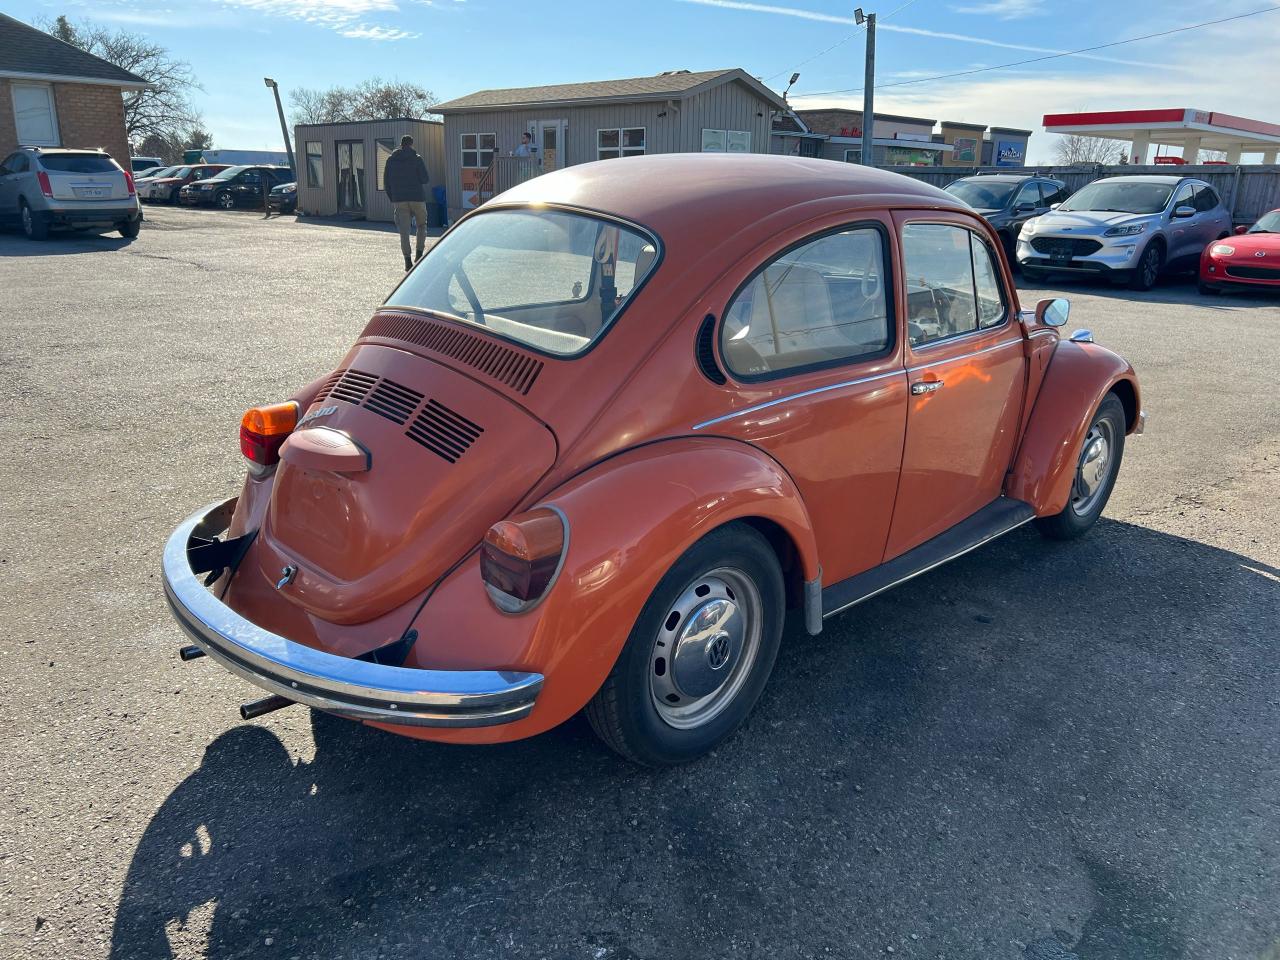 1975 Volkswagen Beetle VERY CLEAN*WELL MAINTAINED*RUNS AND DRIVES GREAT* - Photo #5